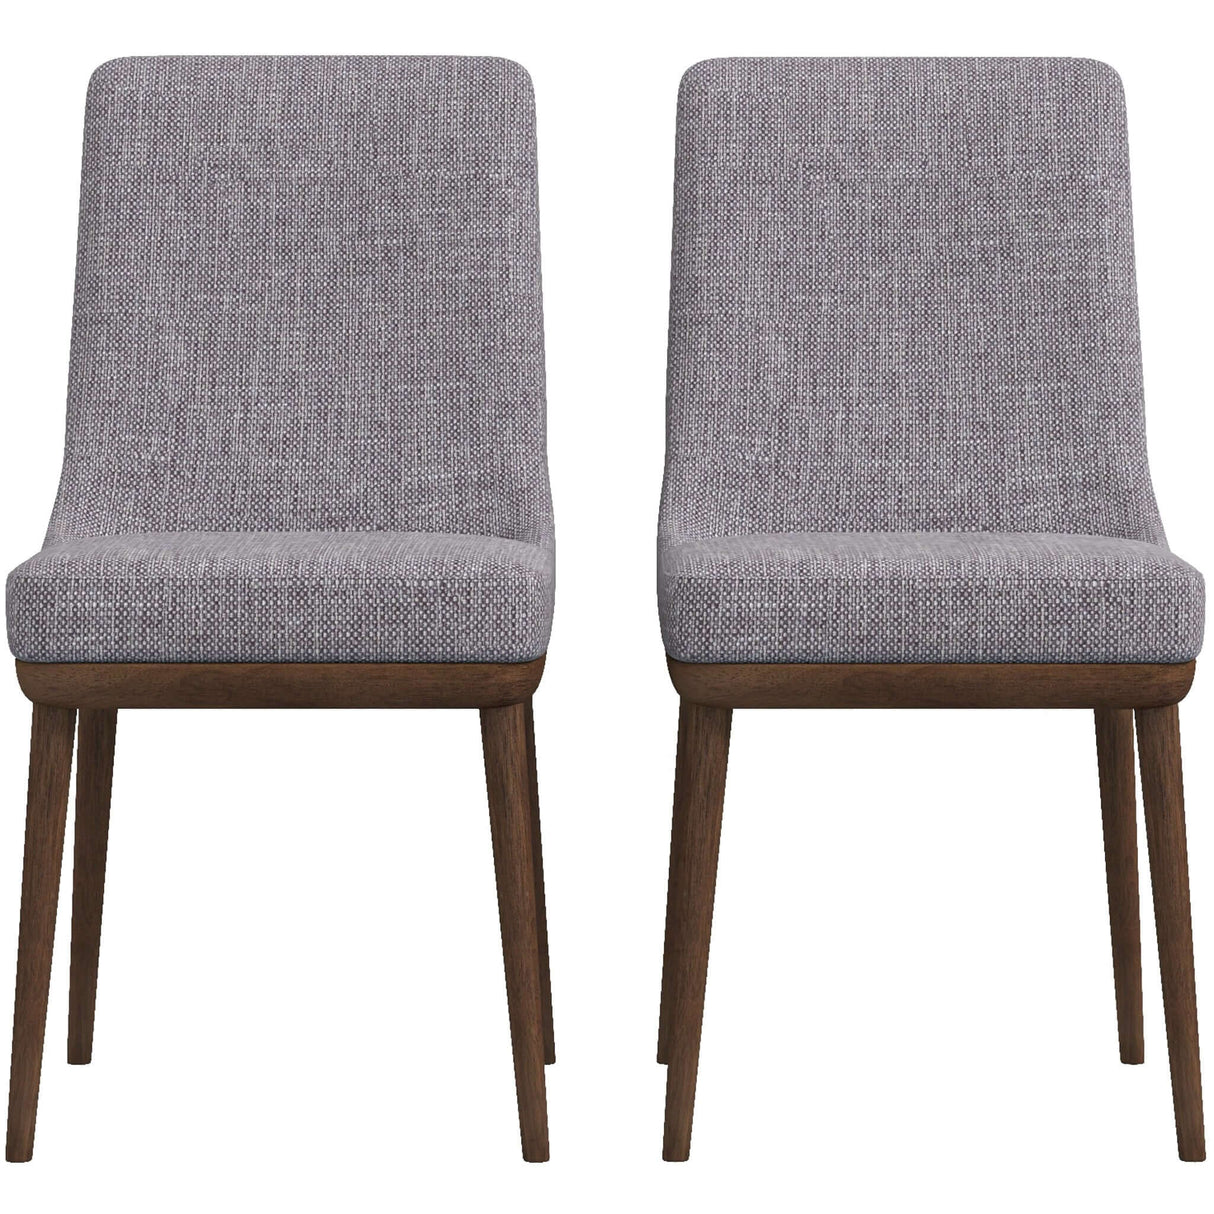 Kate Mid-Century Modern Dining Chair (Set of 2) Cream Polyester Blend